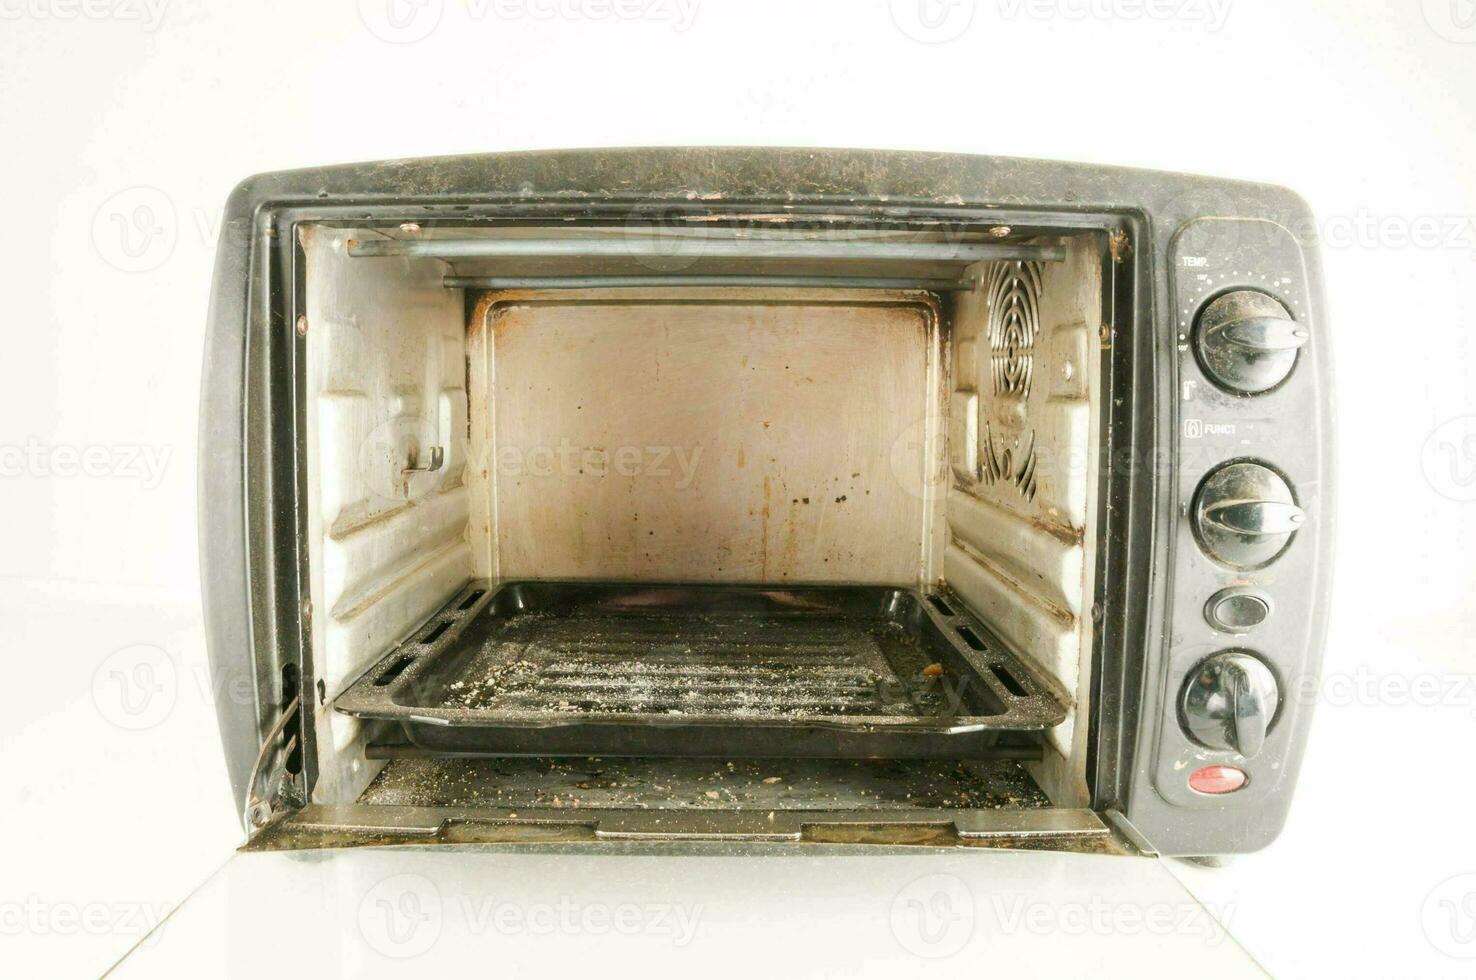 an old toaster oven with a dirty interior photo